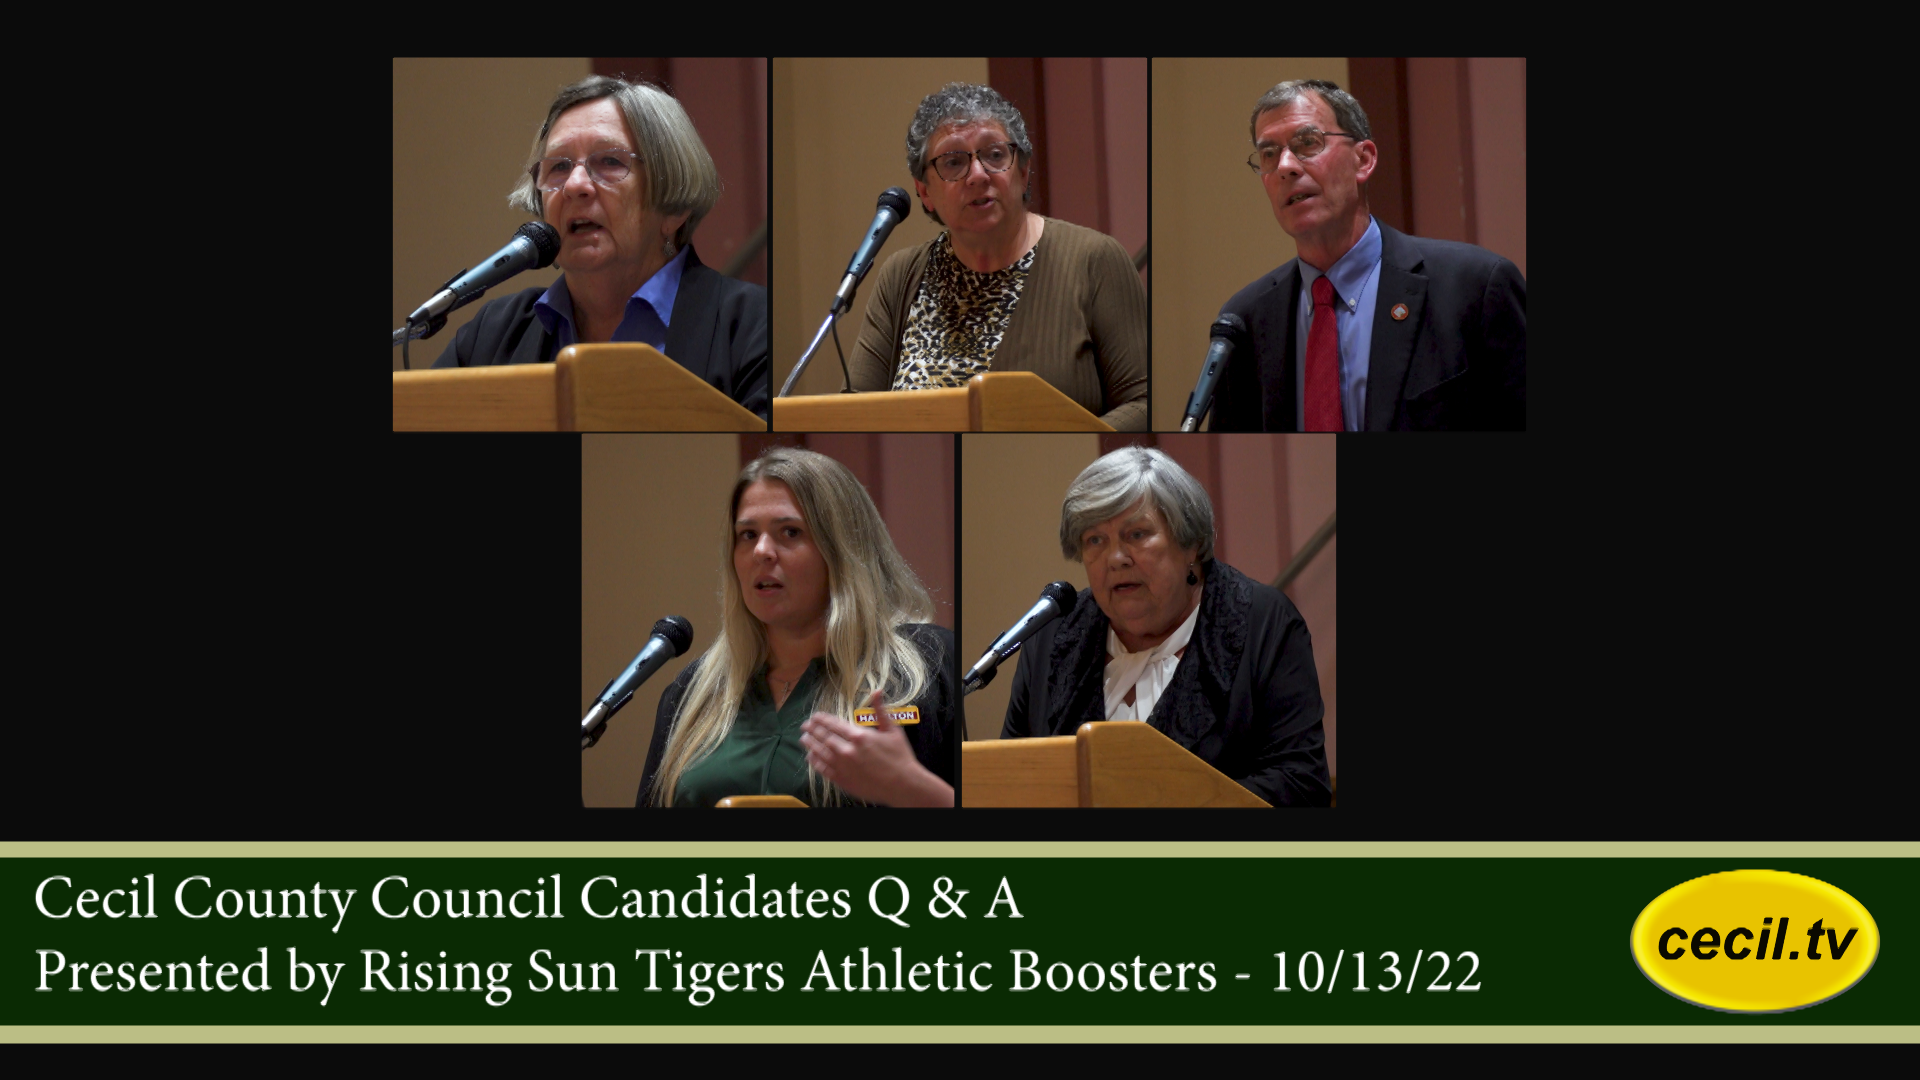 Cecil County Council Candidates Q & A Presented by Rising Sun Tigers Athletic Boosters - 10/13/22